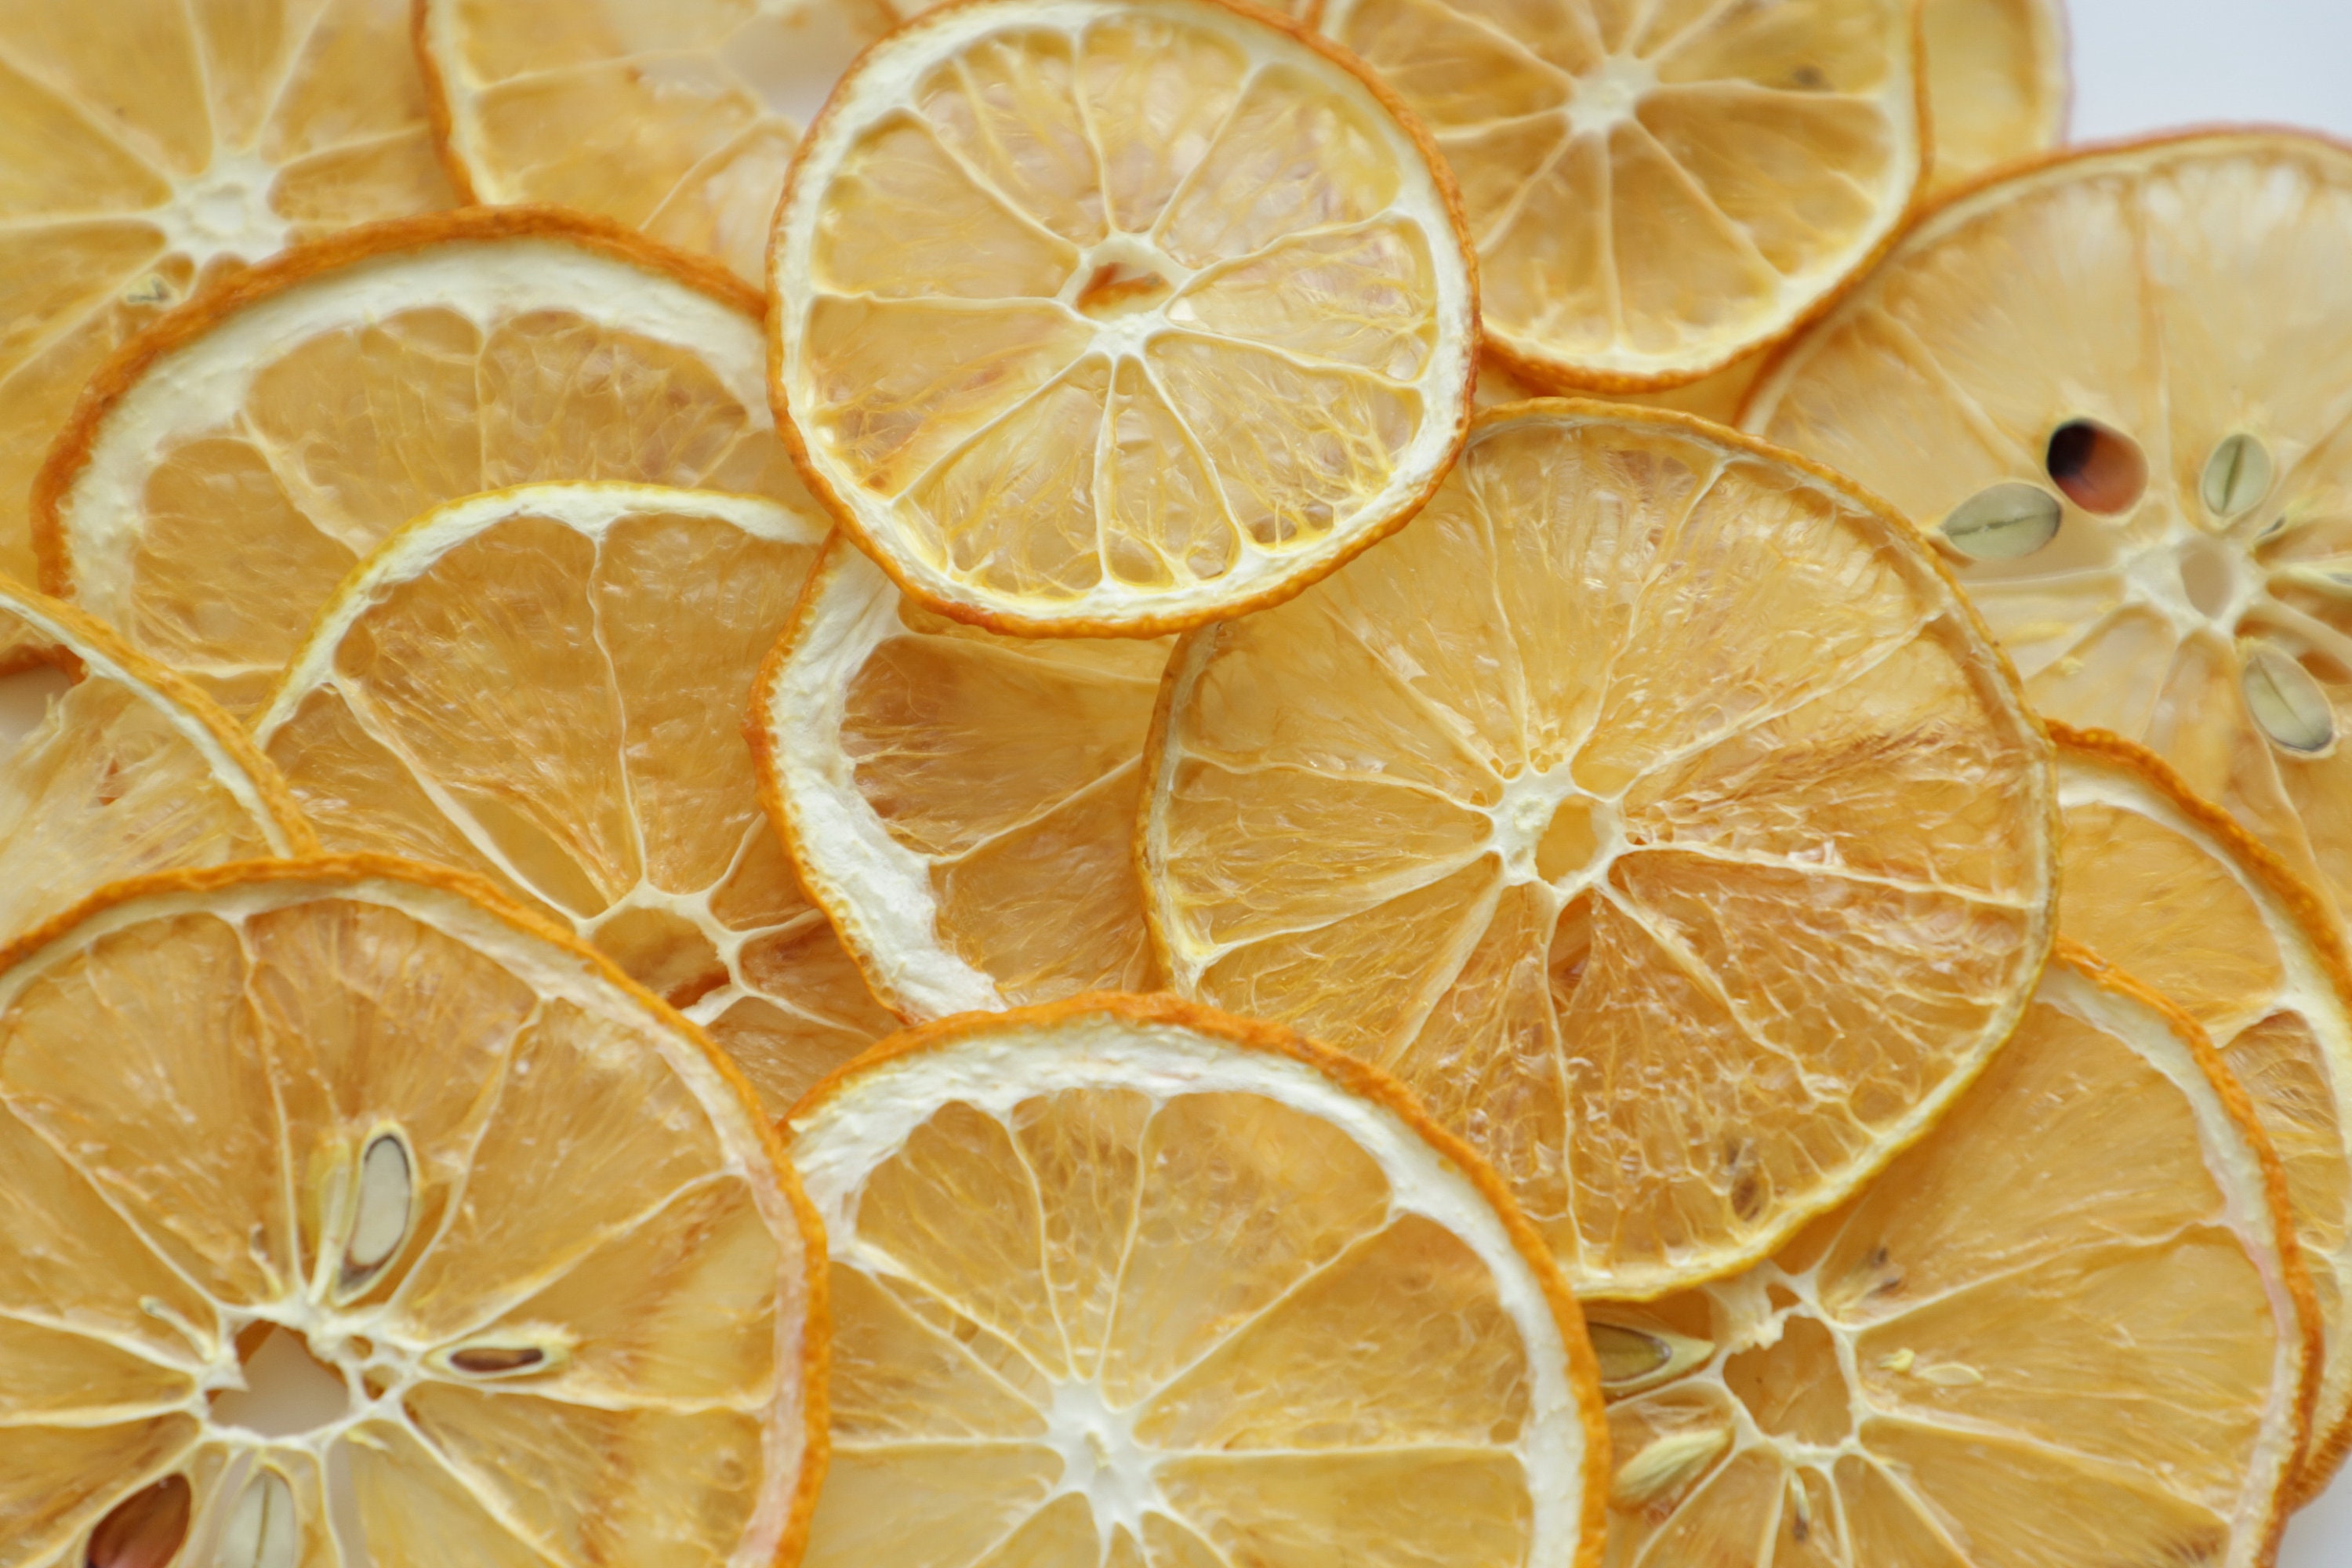 Dried Lemon Slices Wholesale Supplier - Dried Fruits & Nuts Ingredients